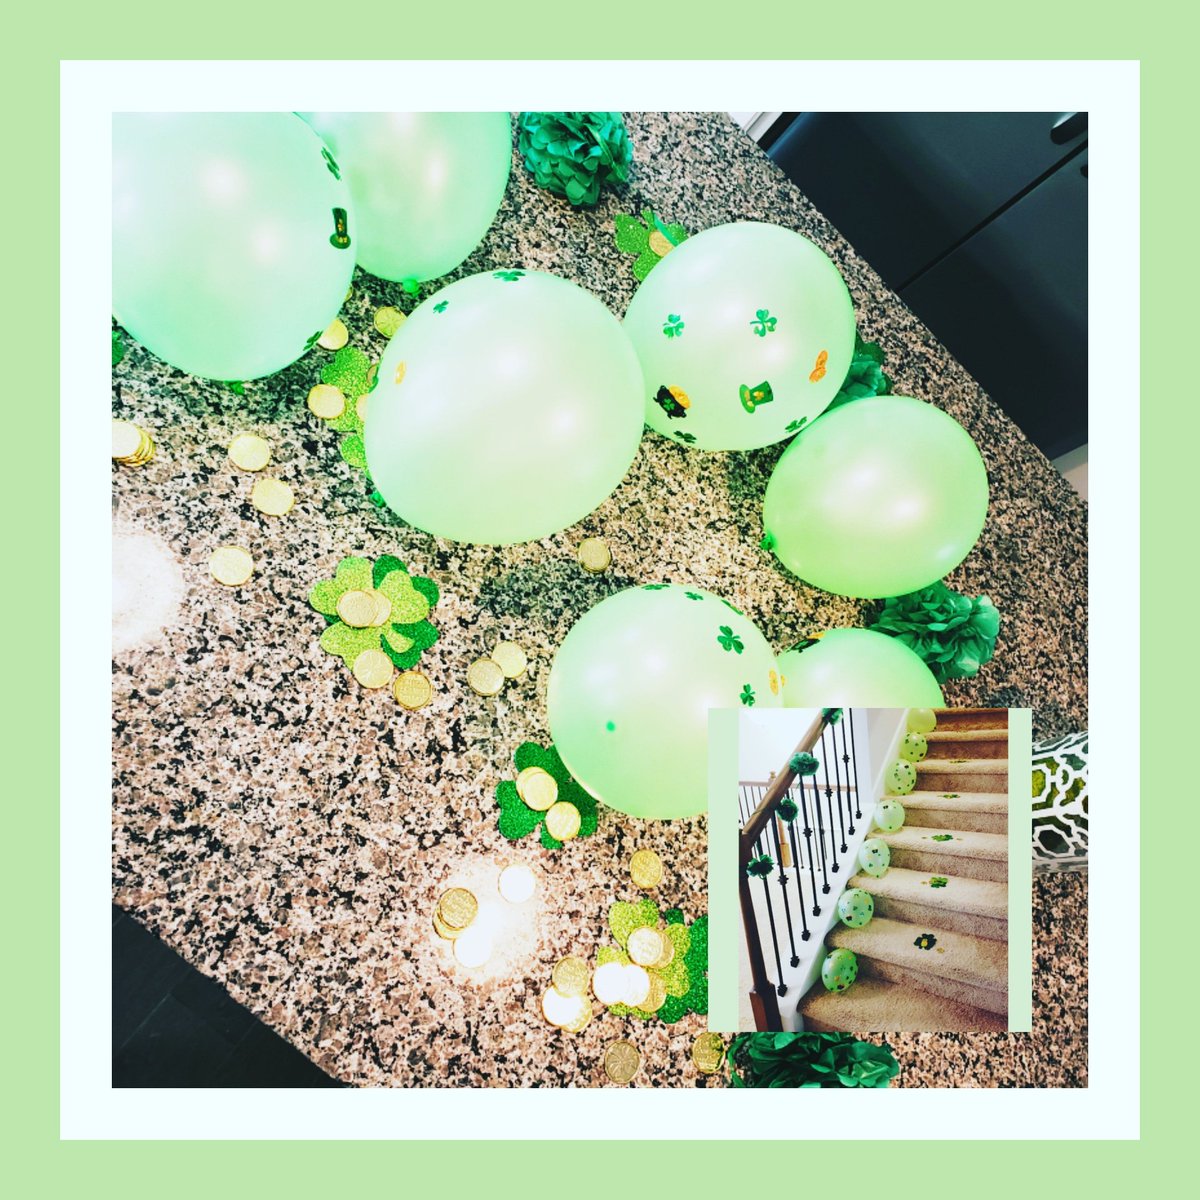 Add a little green to your home on this St Patrick Day!
@PinataAndKrewe
#islanddecor #staircasedecor #simple  #decoracioninteriores #decor #partydecorations #partydecor #kitchendecor #kitchendecorating
#stpatricksday #atlanta #atlantastpatricksdayparade 
 #stpatrickday2019 💚🍀